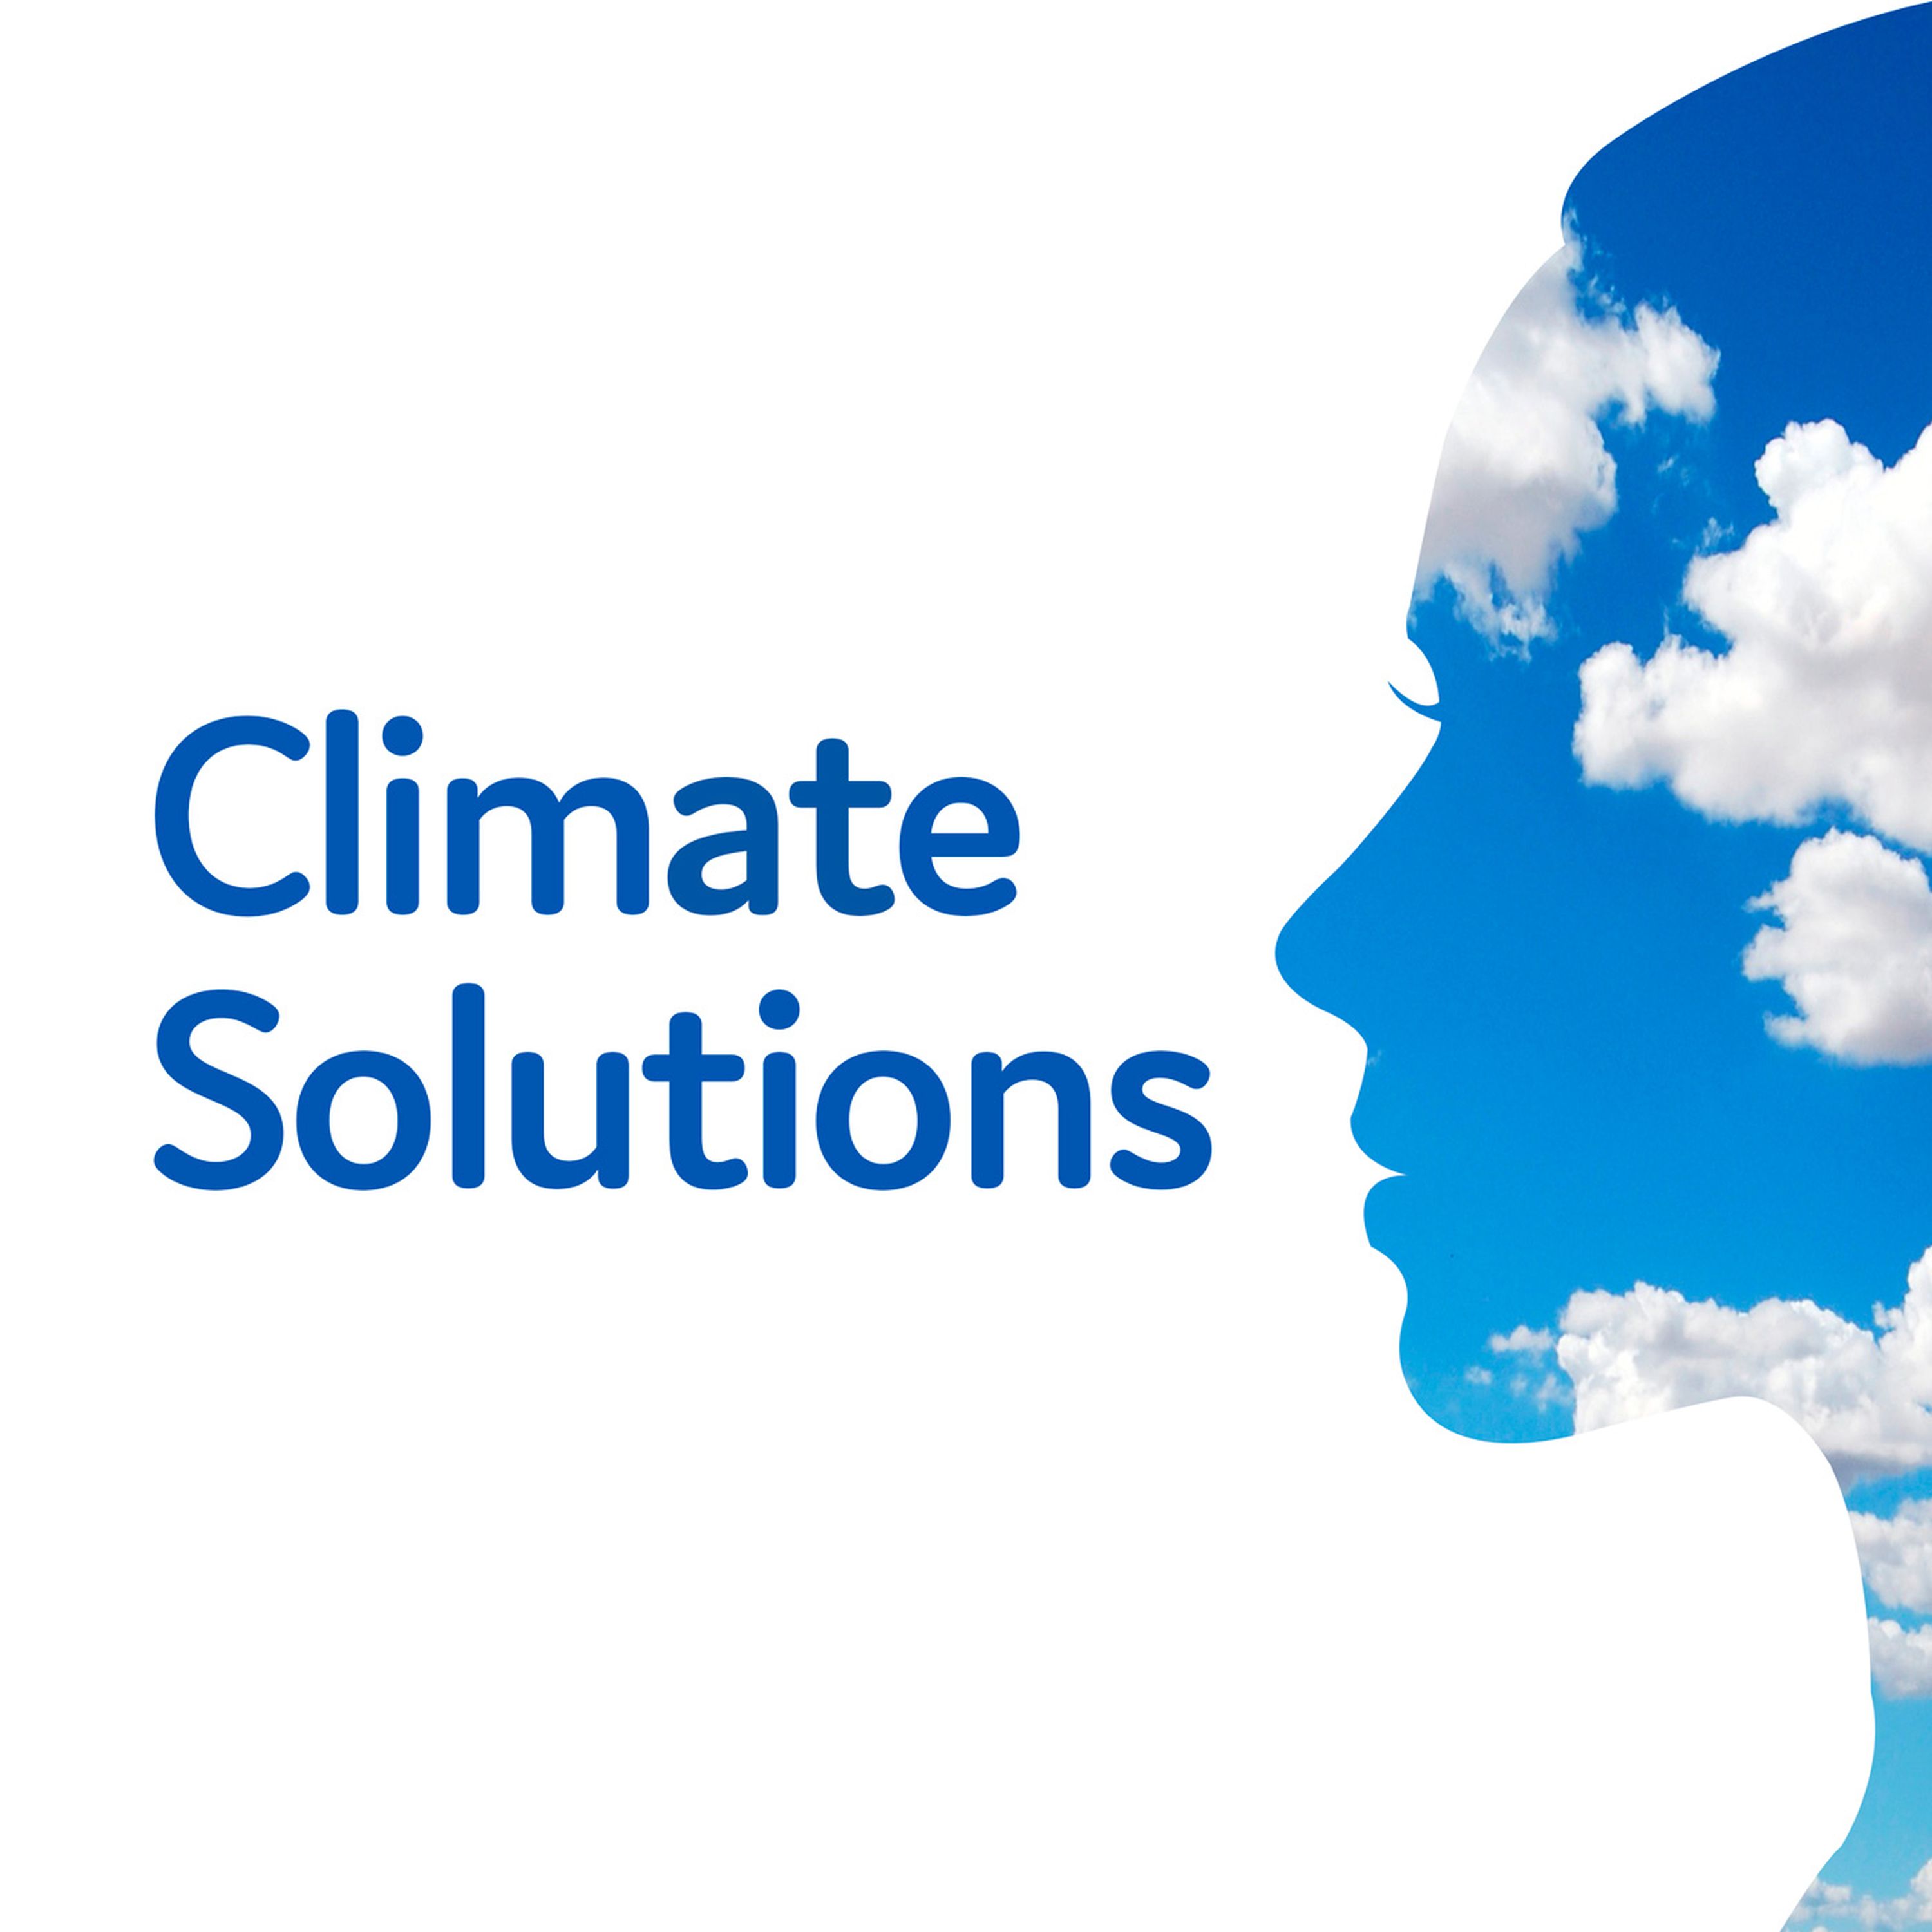 Solutions listening. Climate solutions. Climate Podcast. Master climate solutions.